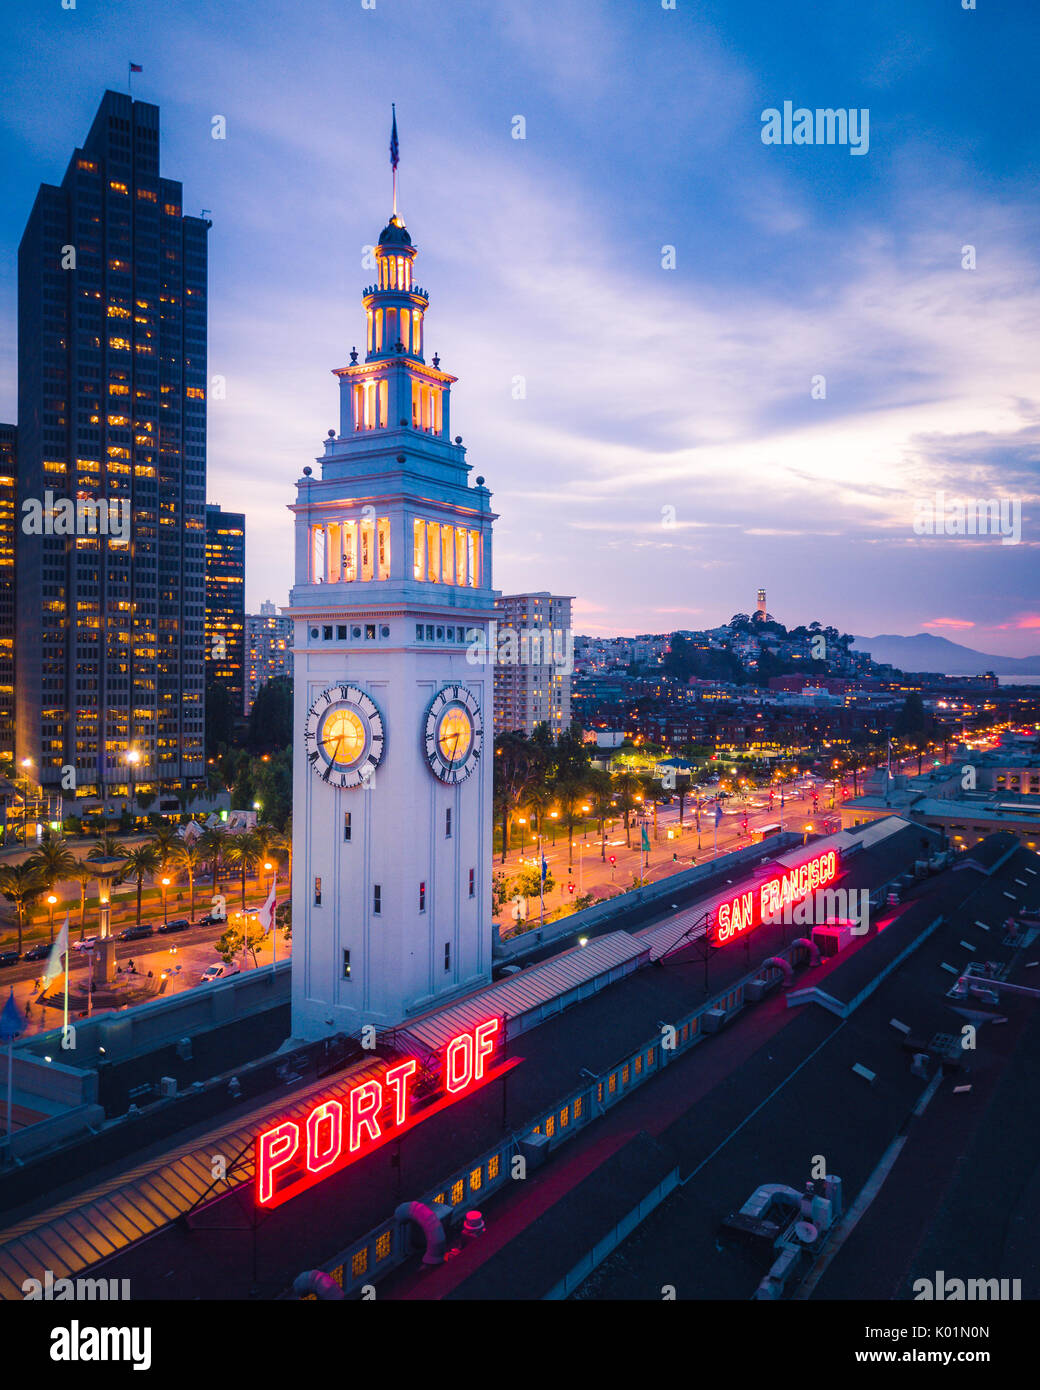 Aerial view of San Francisco Ferry Building at Night Stock Photo